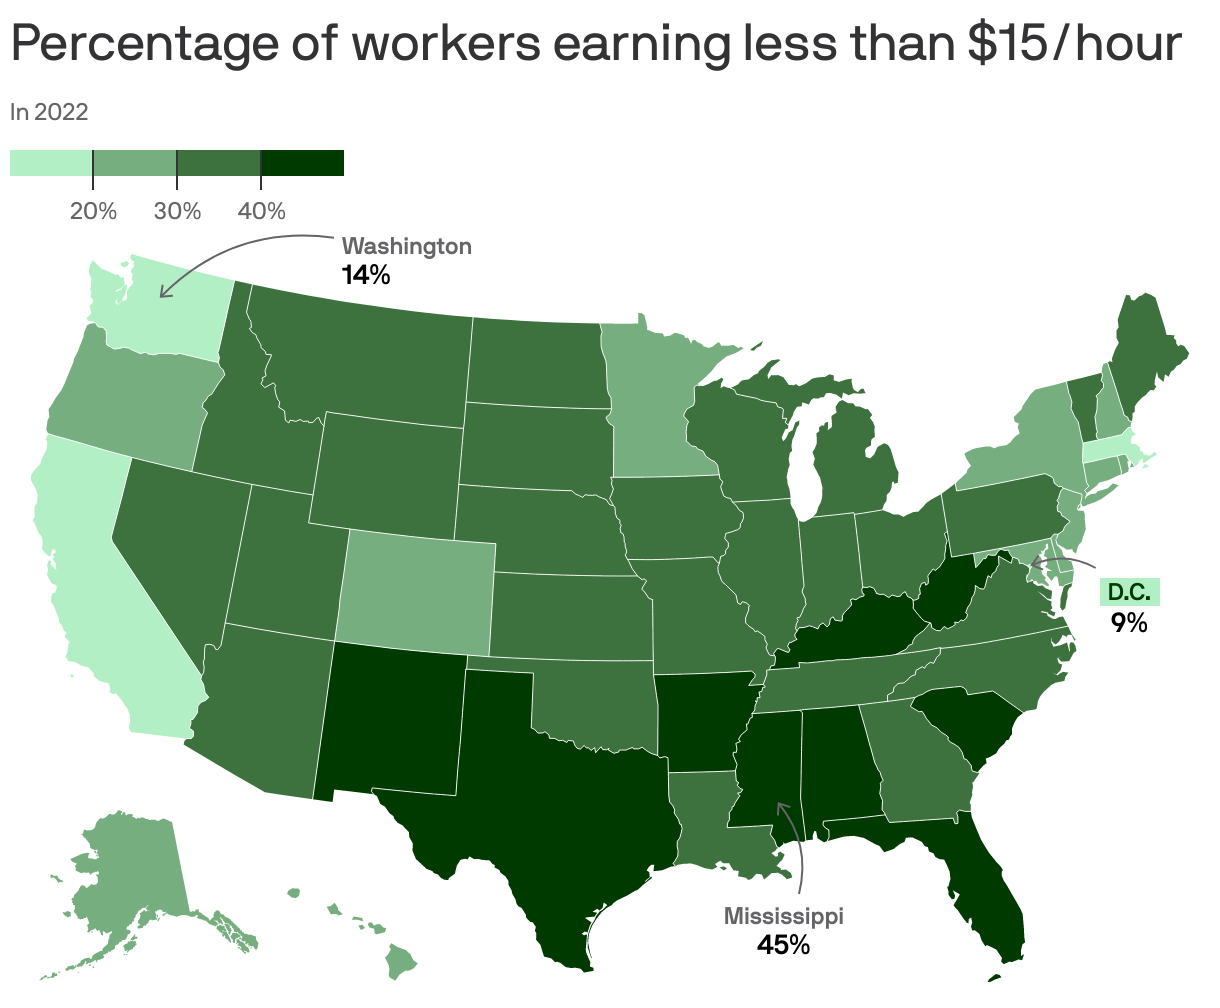 Percentage of workers earning less than $15/hour